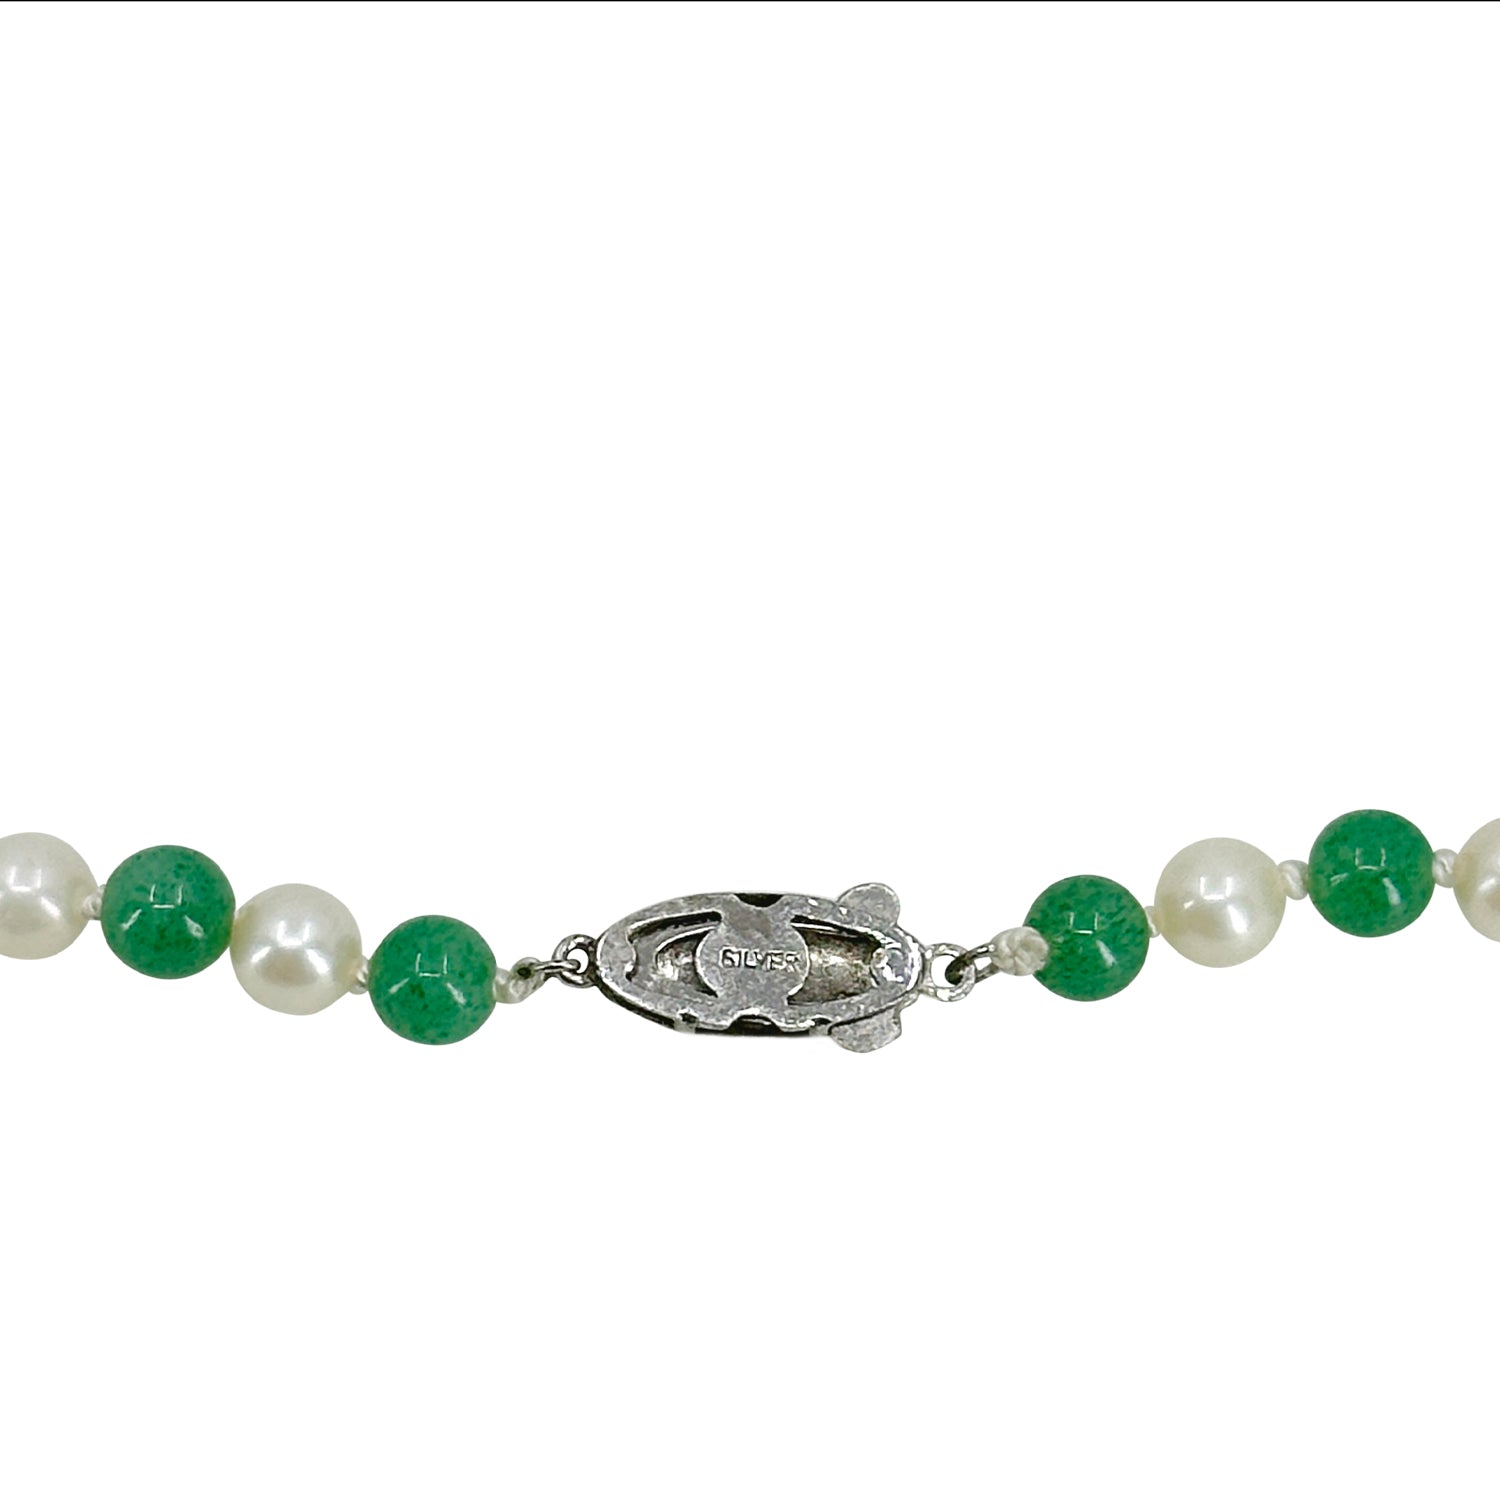 Vintage Green Aventurine Japanese Saltwater Akoya Cultured Pearl Opera Necklace- Sterling Silver 32 Inch